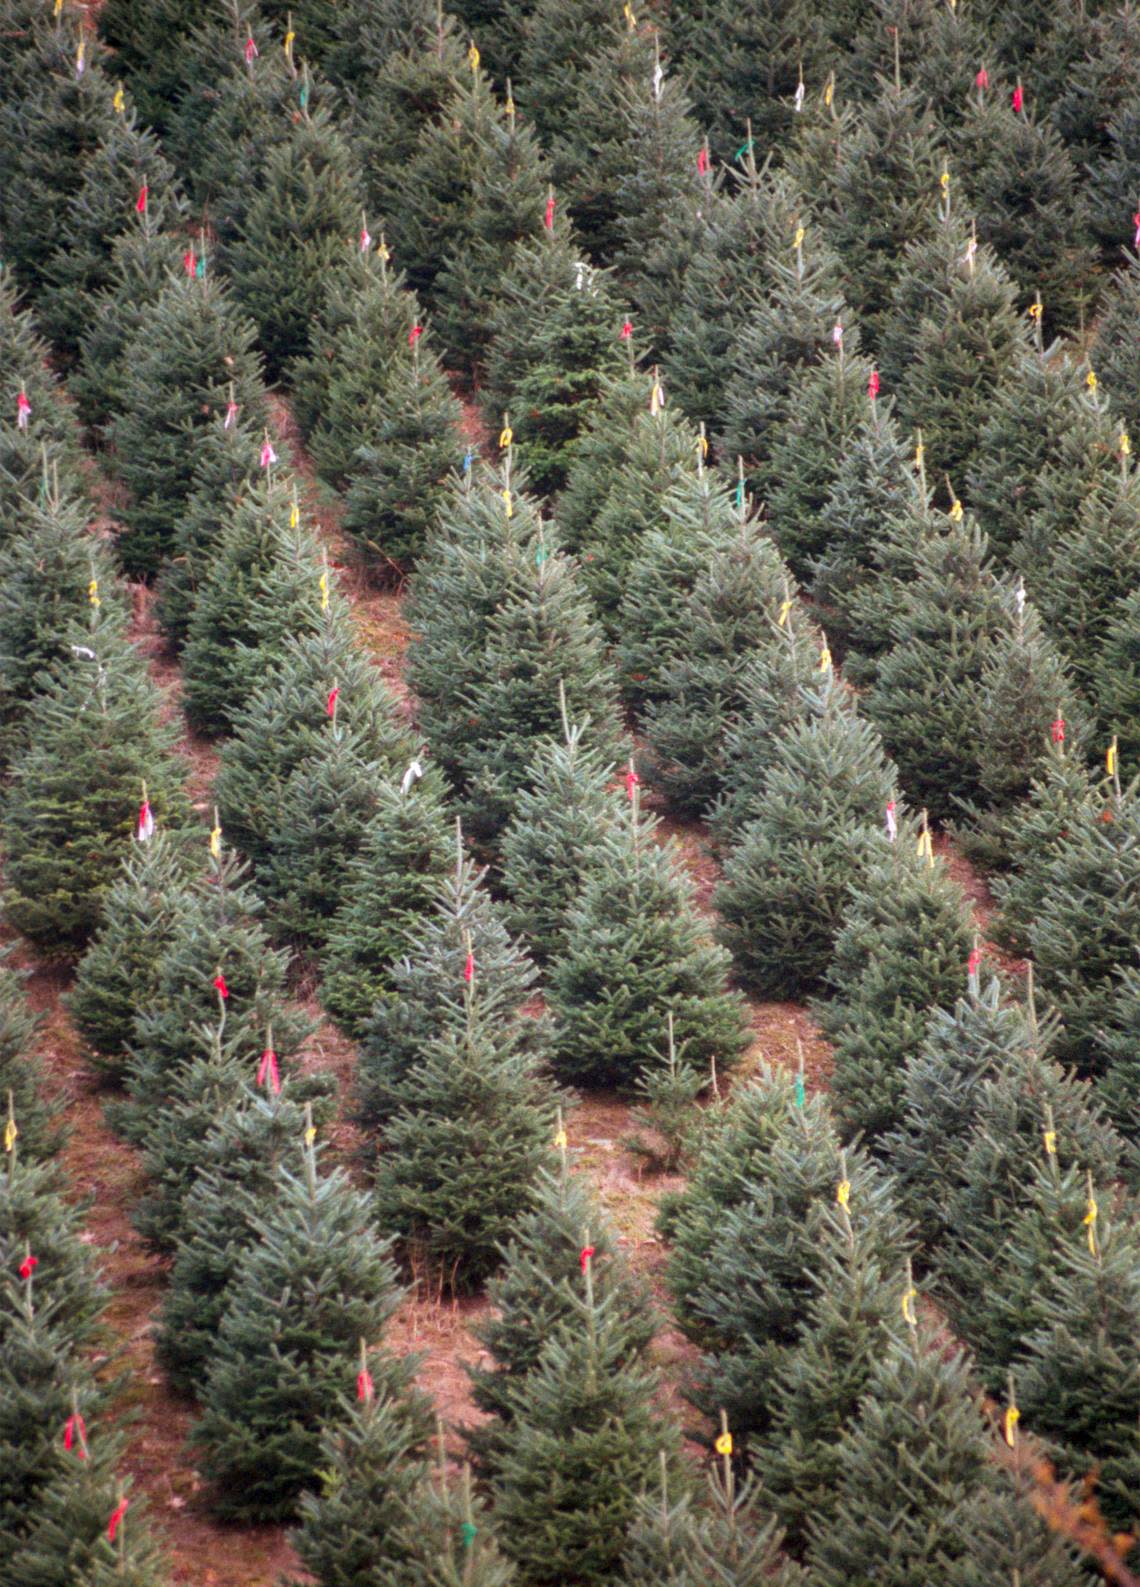 Fraser Fir trees grown on a farm near Boone, N.C. The variety is a popular one for Christmas trees, which are a valuable agricultural crop for several northwestern N.C. counties. File photo